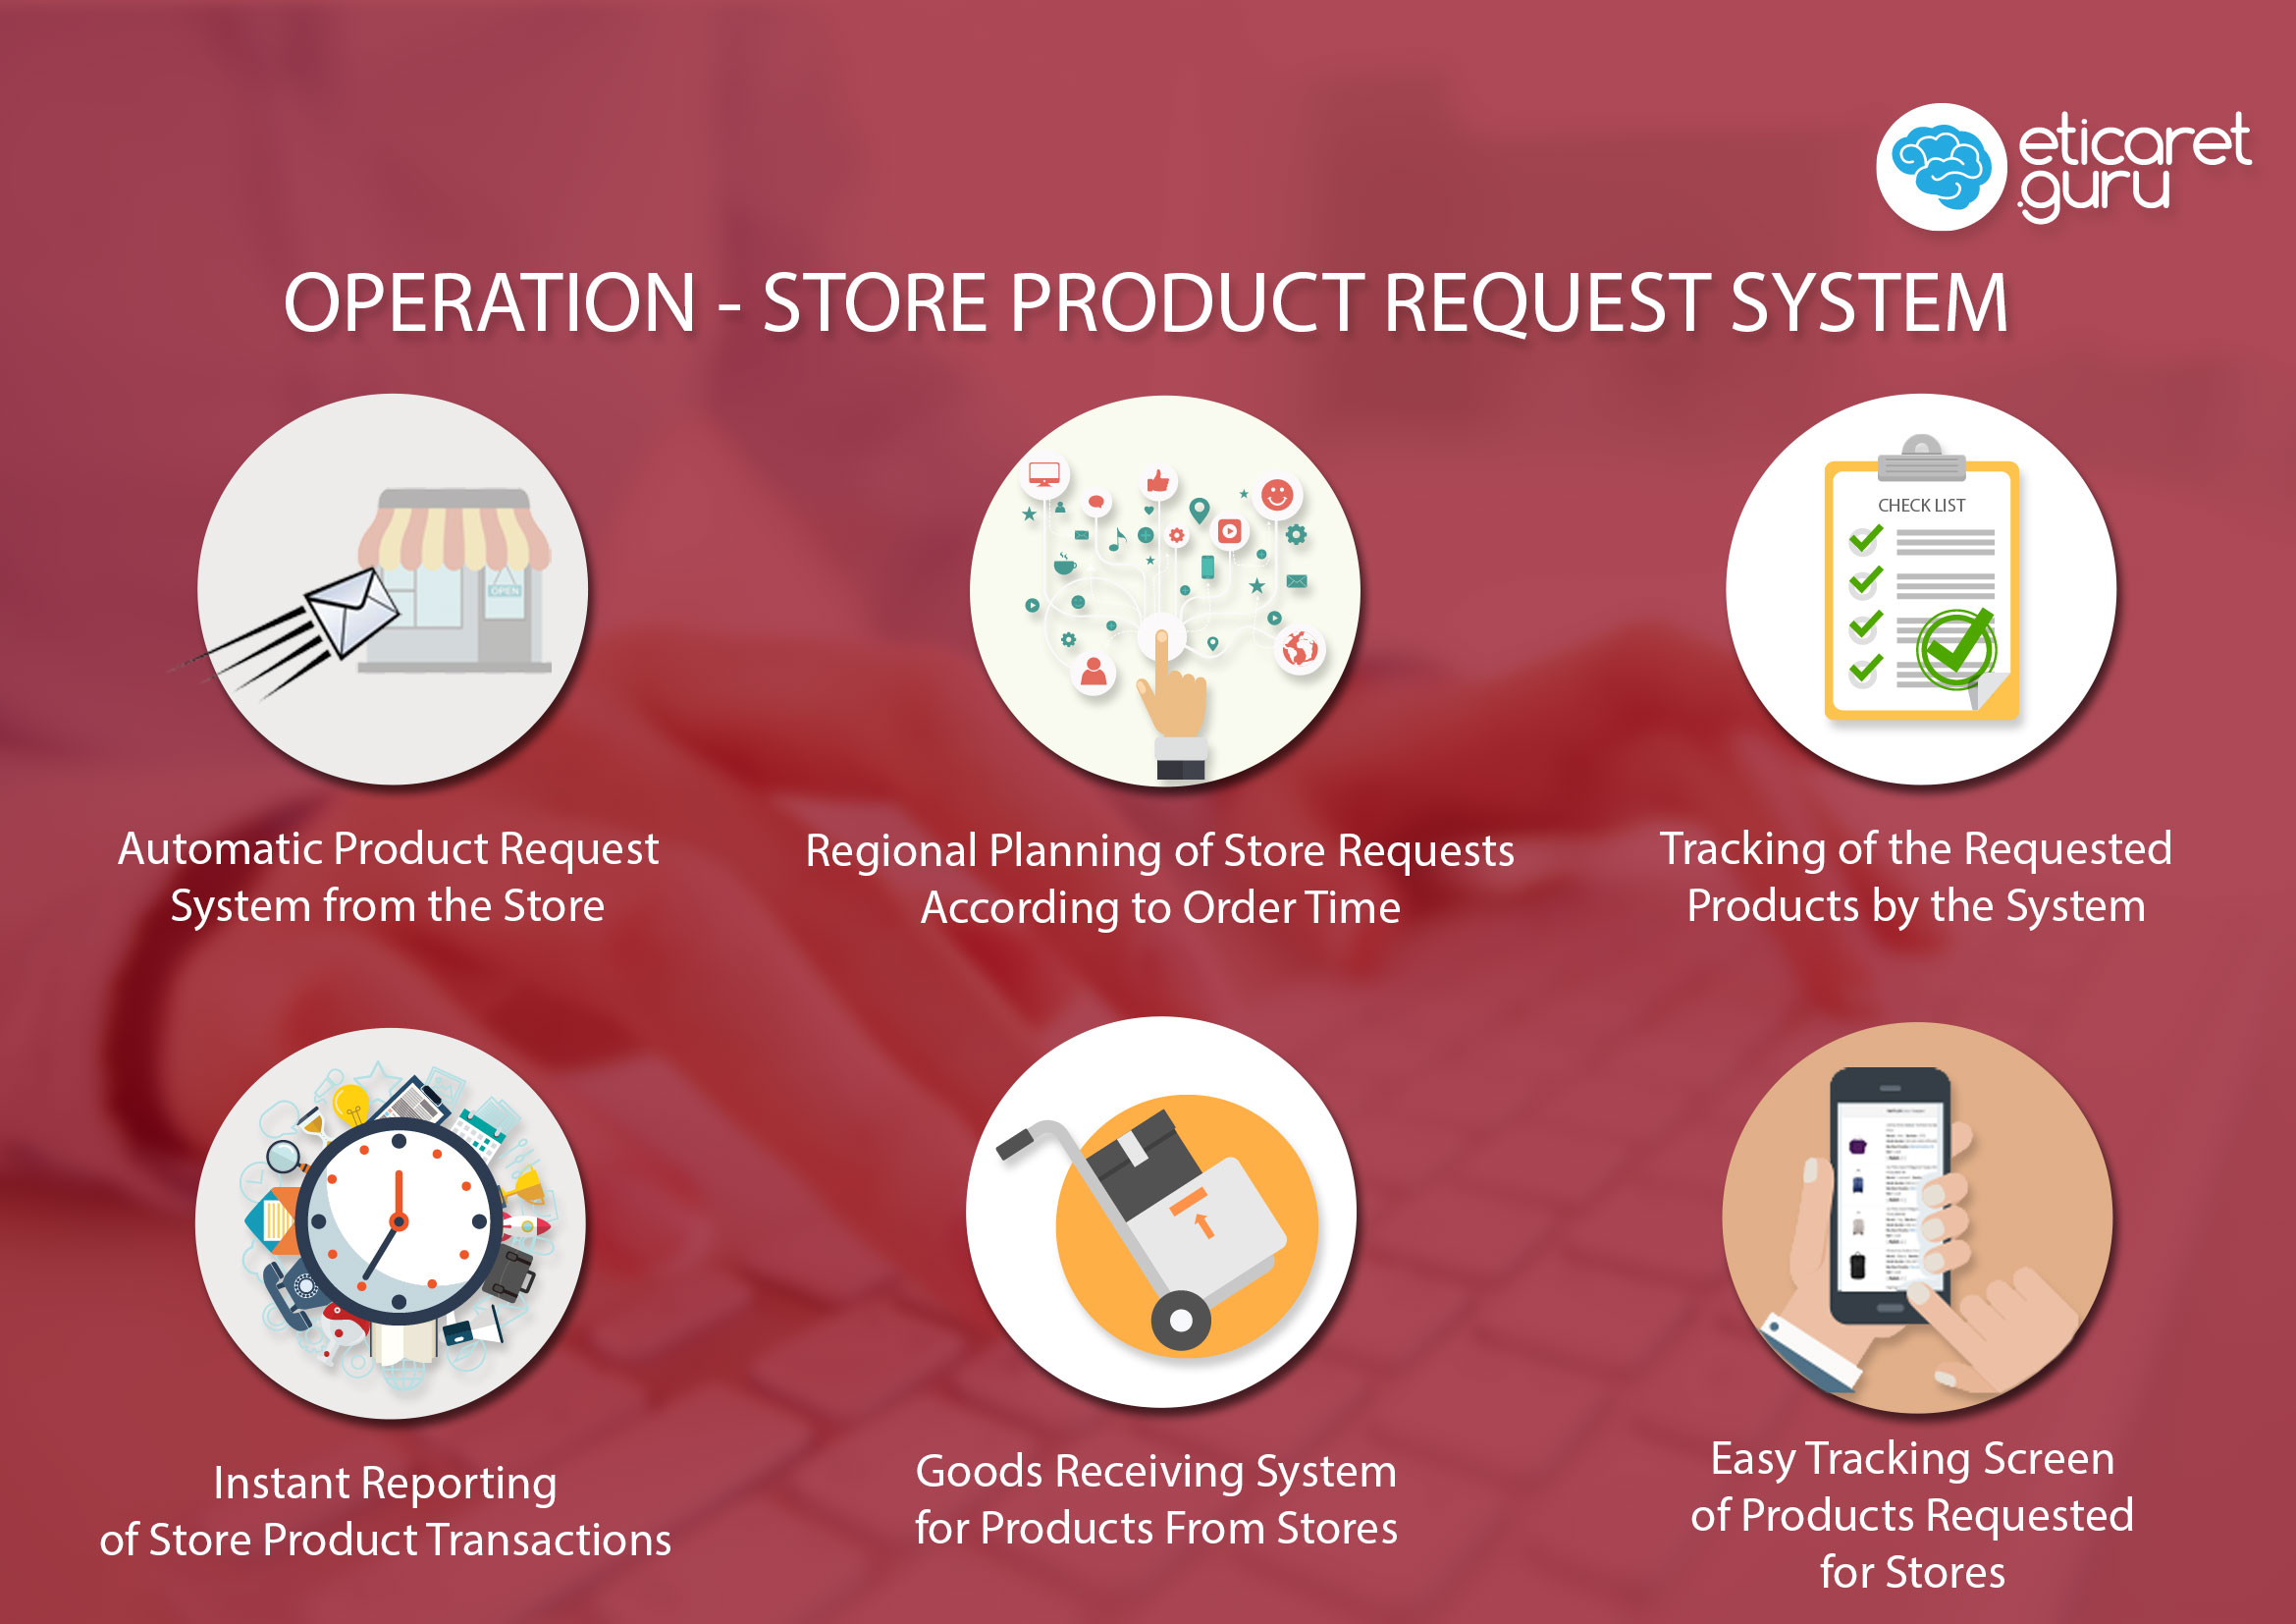 Operation - Store Product Request System